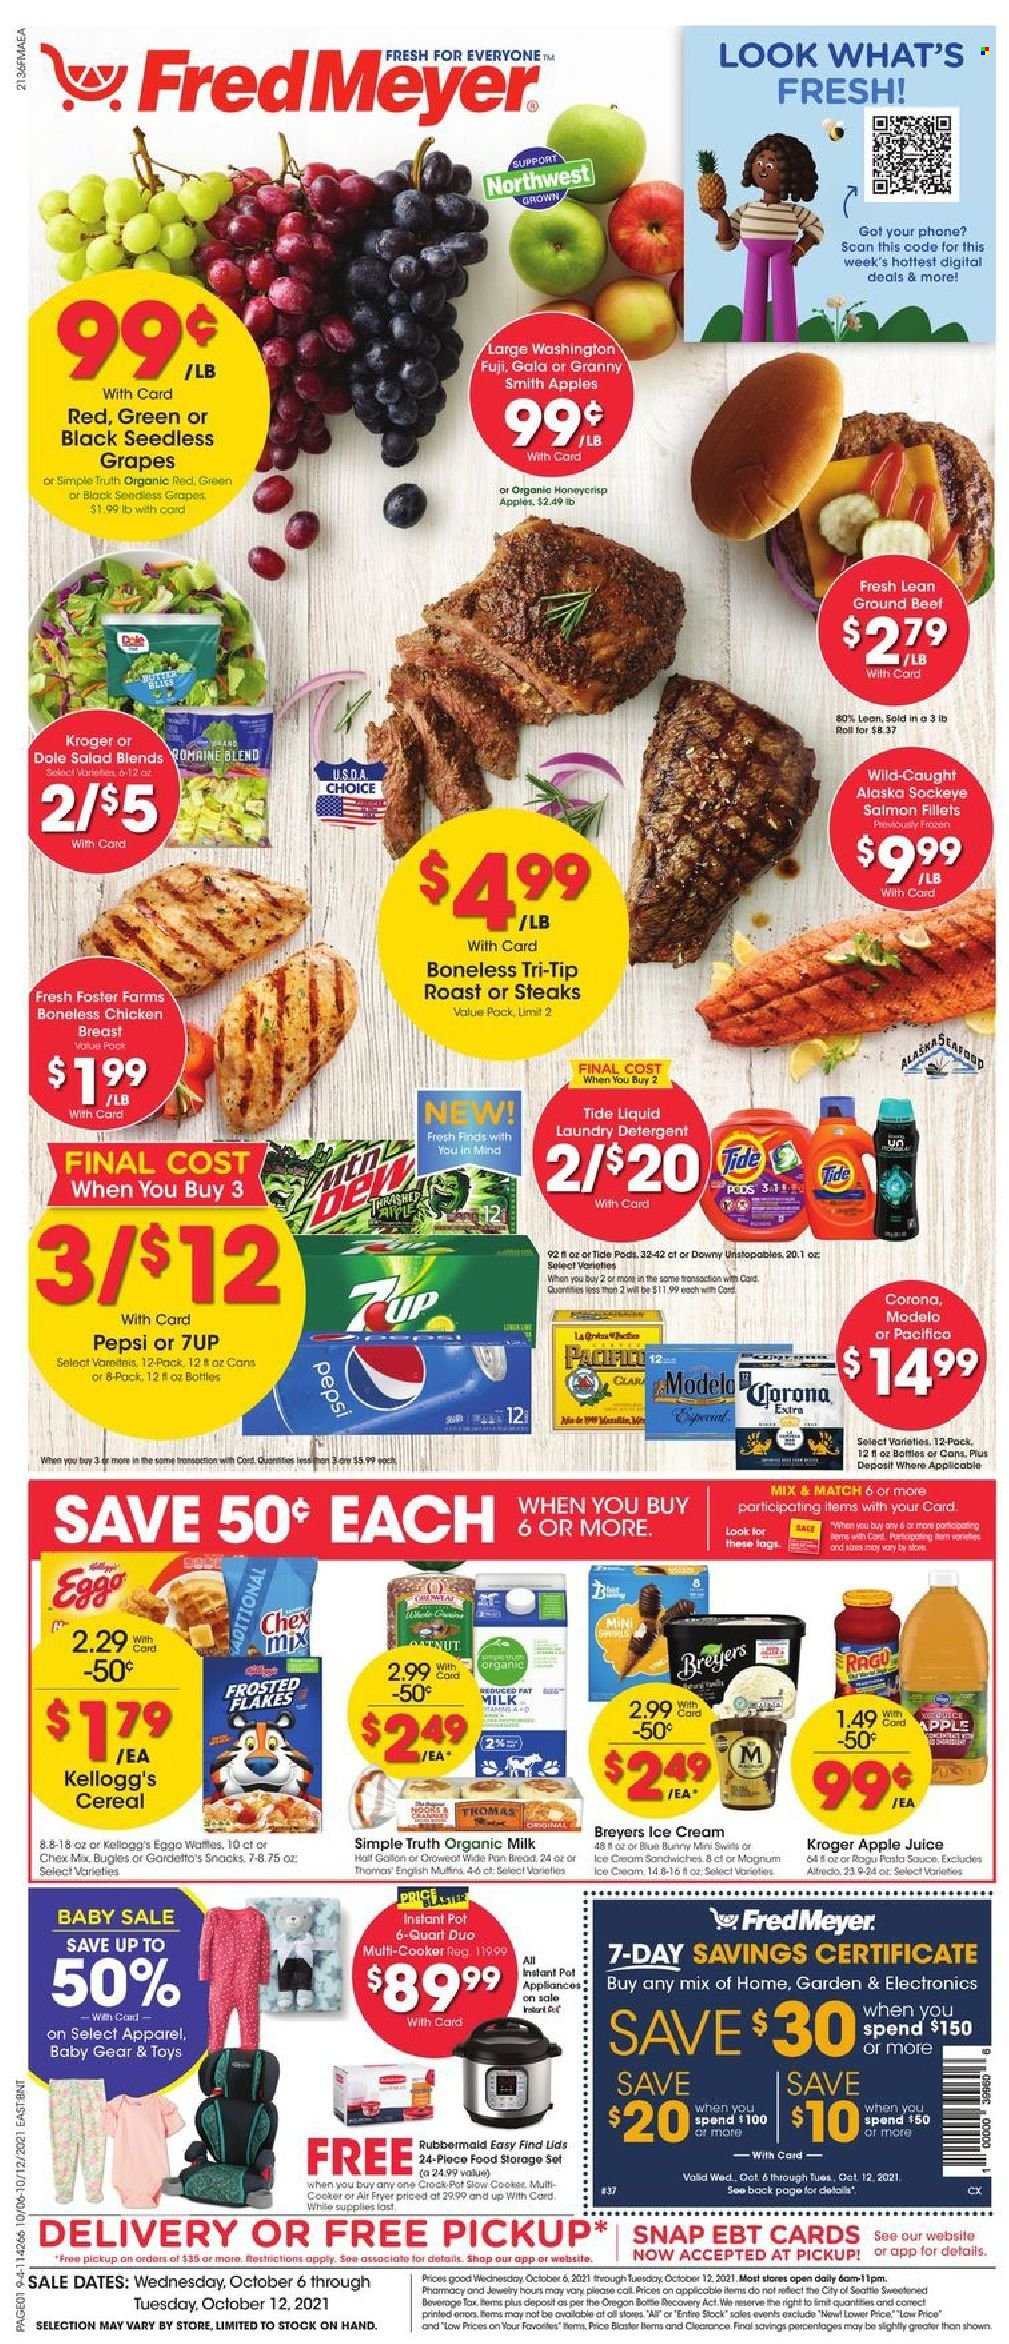 thumbnail - Fred Meyer Flyer - 10/06/2021 - 10/12/2021 - Sales products - salad, Dole, Gala, grapes, Granny Smith, salmon, salmon fillet, pasta sauce, organic milk, Magnum, ice cream, snack, Kellogg's, Chex Mix, cereals, Frosted Flakes, ragu, apple juice, Pepsi, juice, 7UP, beer, Corona Extra, Modelo, beef meat, ground beef, steak, detergent, Tide, Unstopables, laundry detergent, pot, pan, storage container set, multifunction cooker, slow cooker, air fryer, Instant Pot, toys. Page 1.